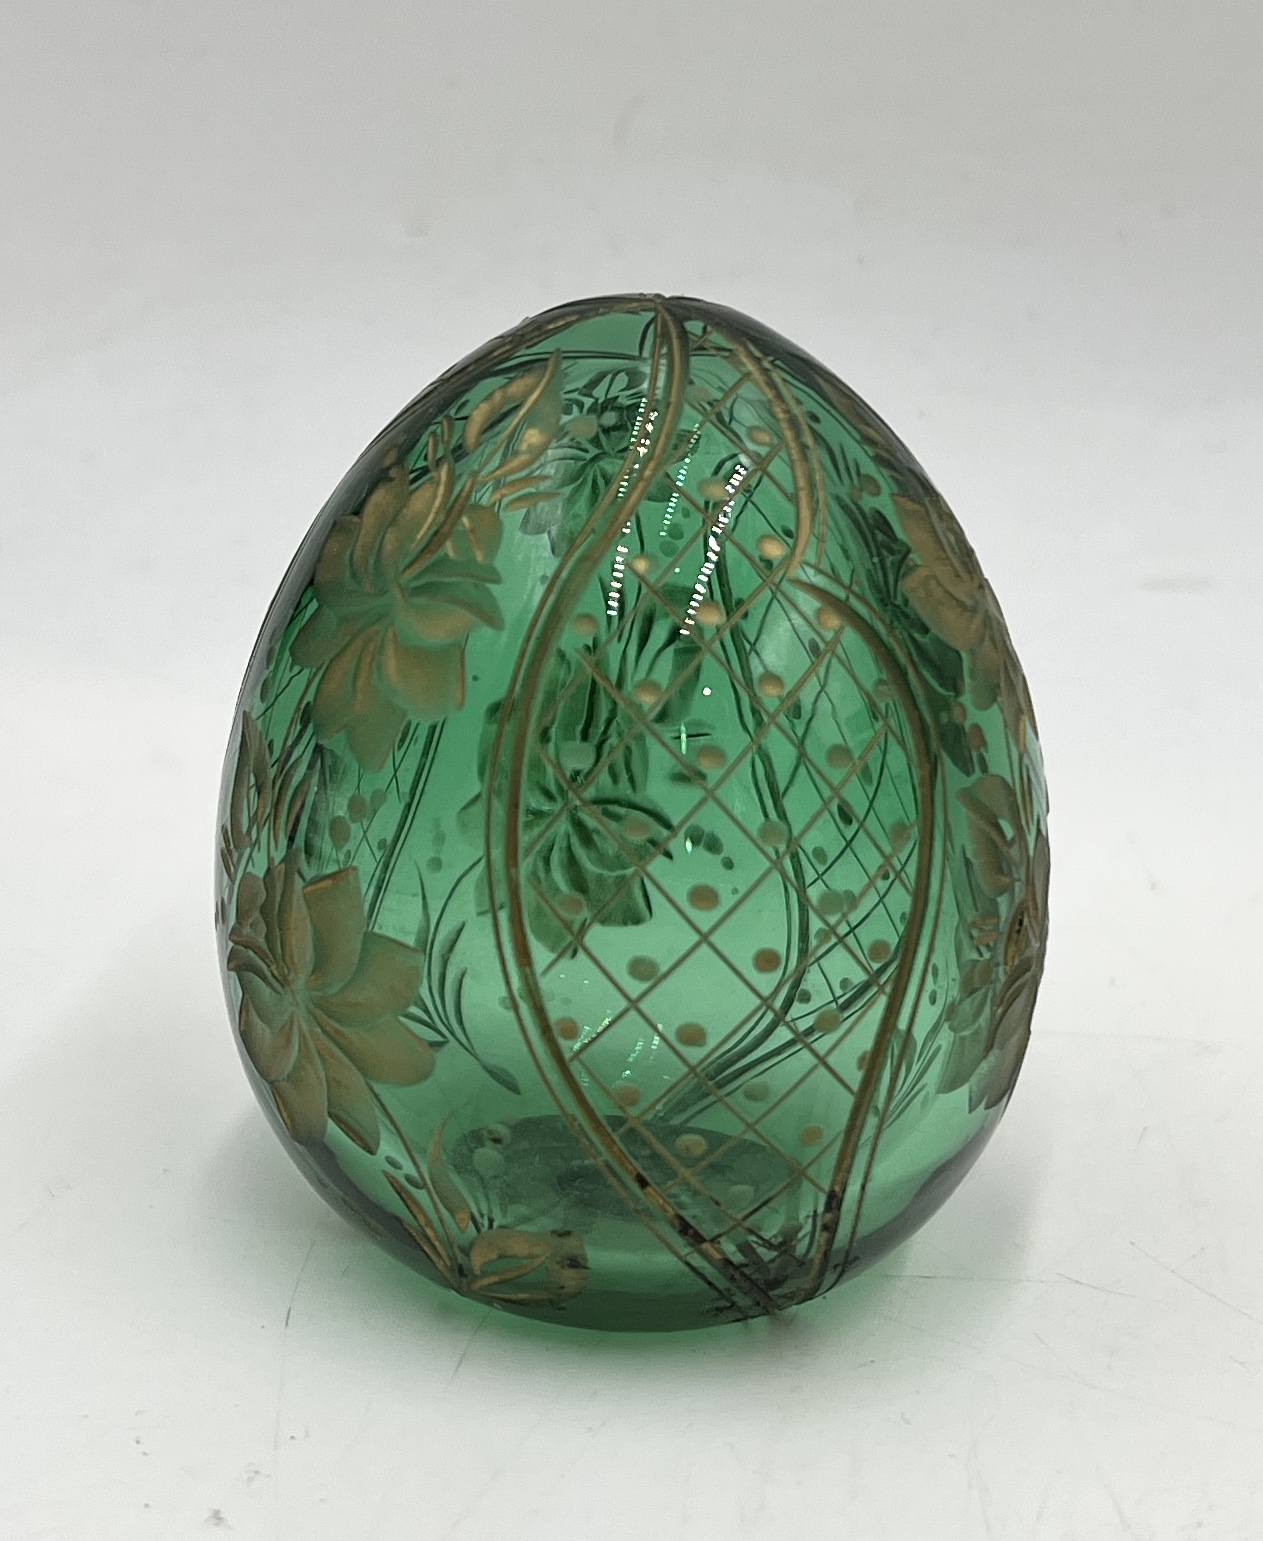 Faberge Modern egg in green glass with gilded detail, made in Russia - height approx. 5cm - Image 2 of 4